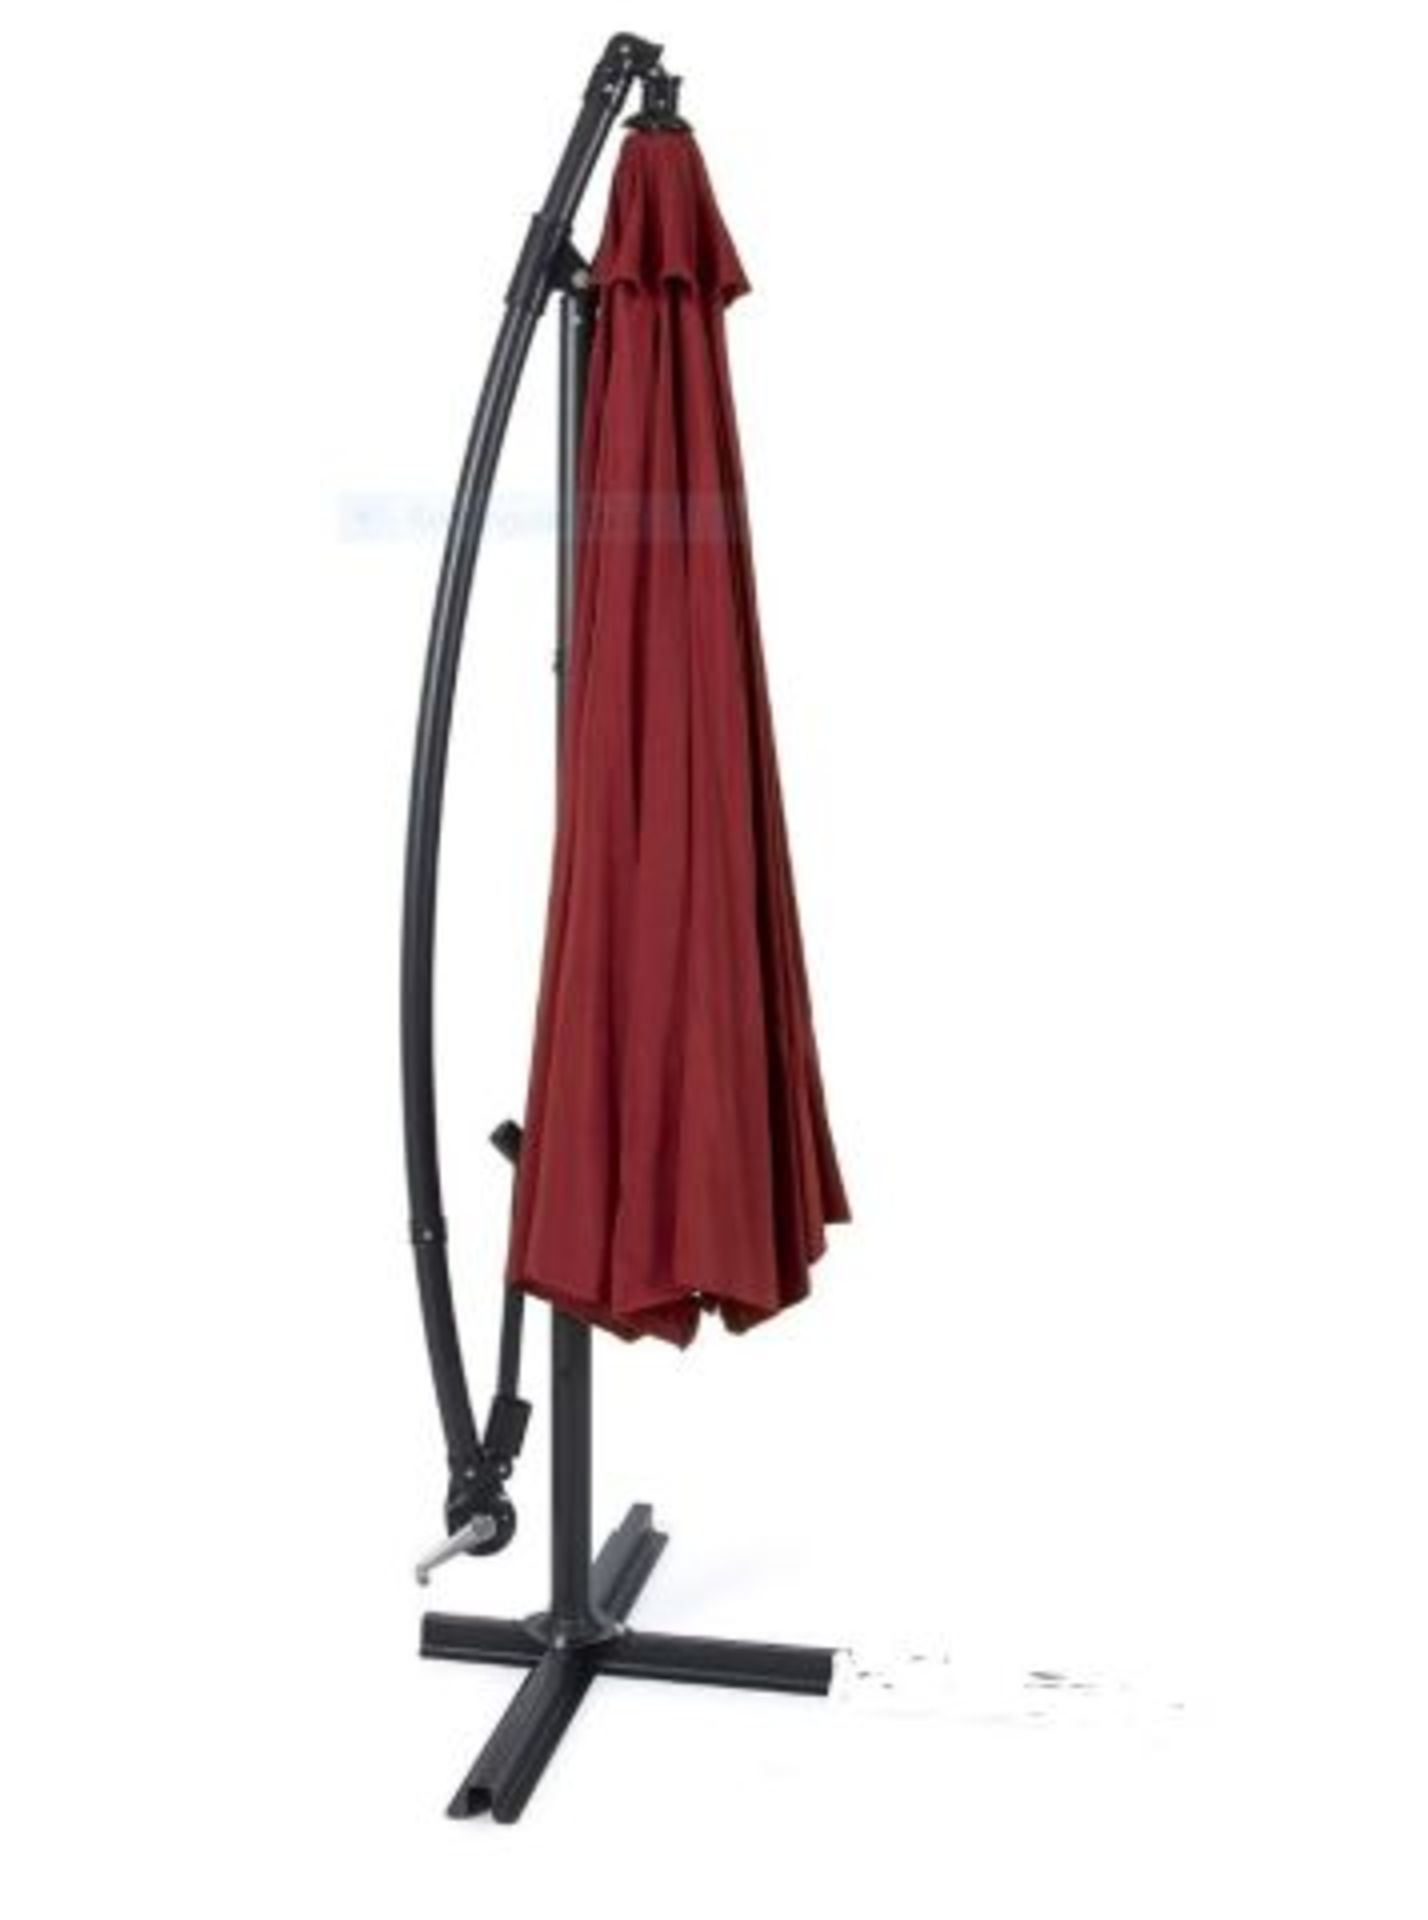 * Burgundy Banana Parasol 3m Wide Online sale price £99. Brand New & boxed. Manufactured with a - Image 2 of 2